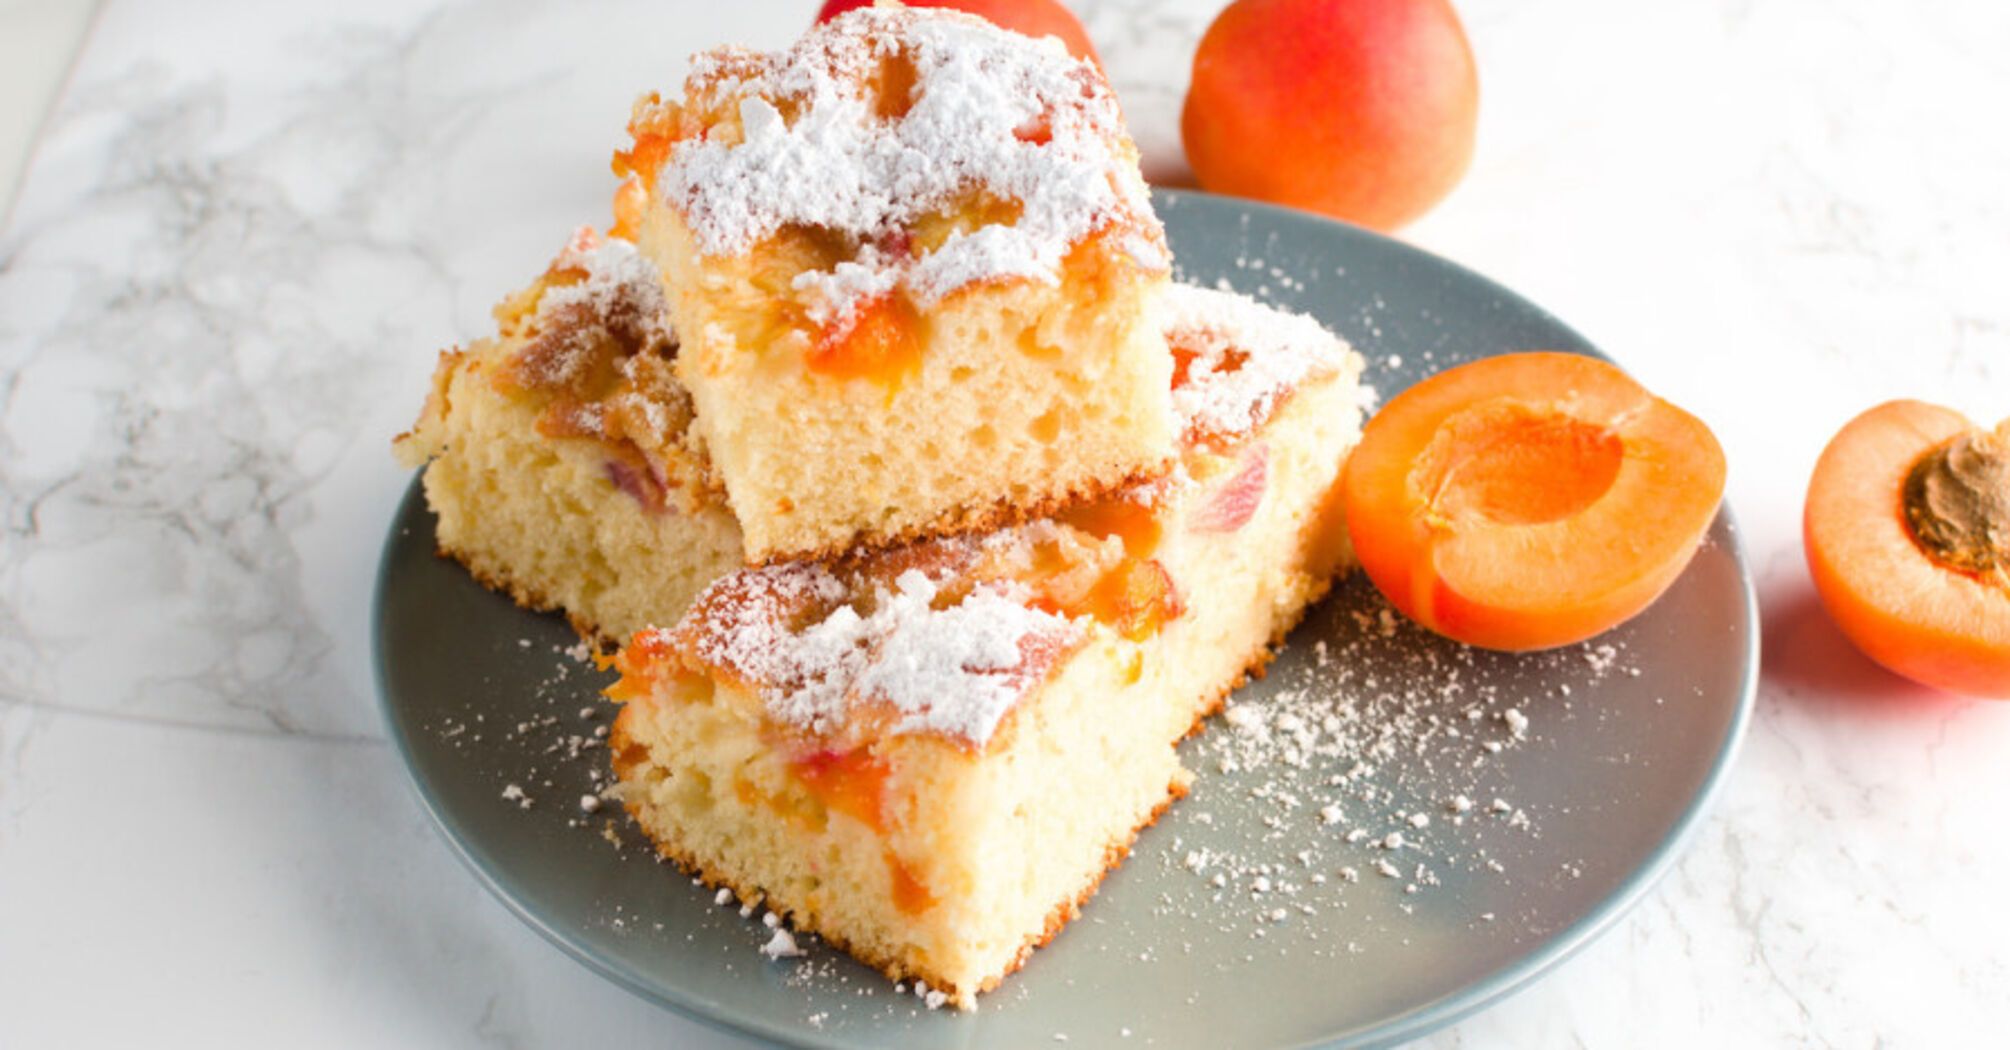 Delicious sponge cake with apricots: always comes out fluffy